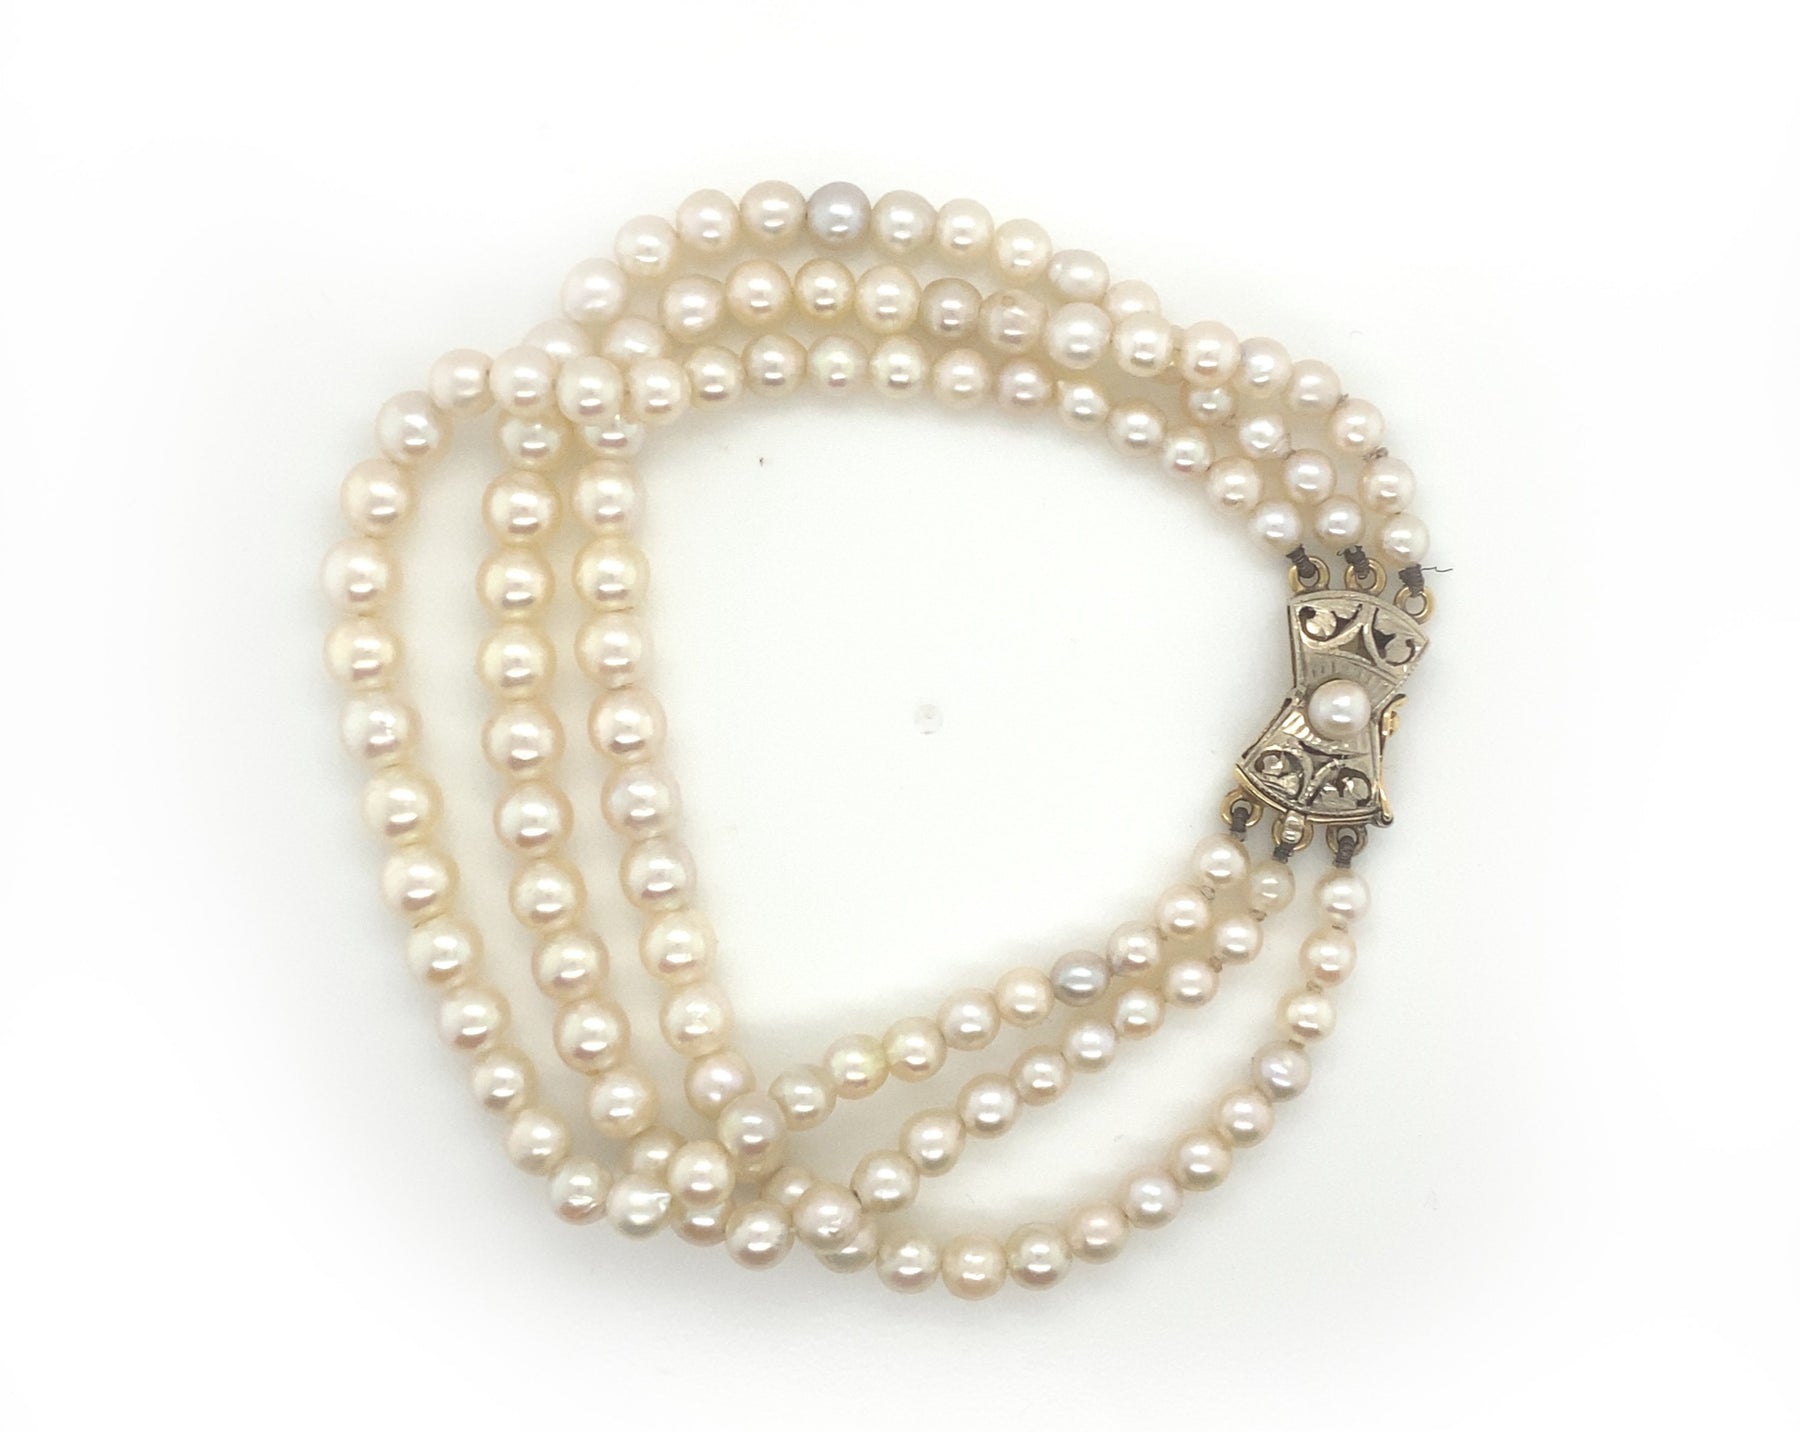 Vintage Double Strand Pearl Necklace With Diamond Clasp - Antique Jewelry |  Vintage … | Double strand pearl necklace, Pearl necklace vintage, Pearl  necklace designs